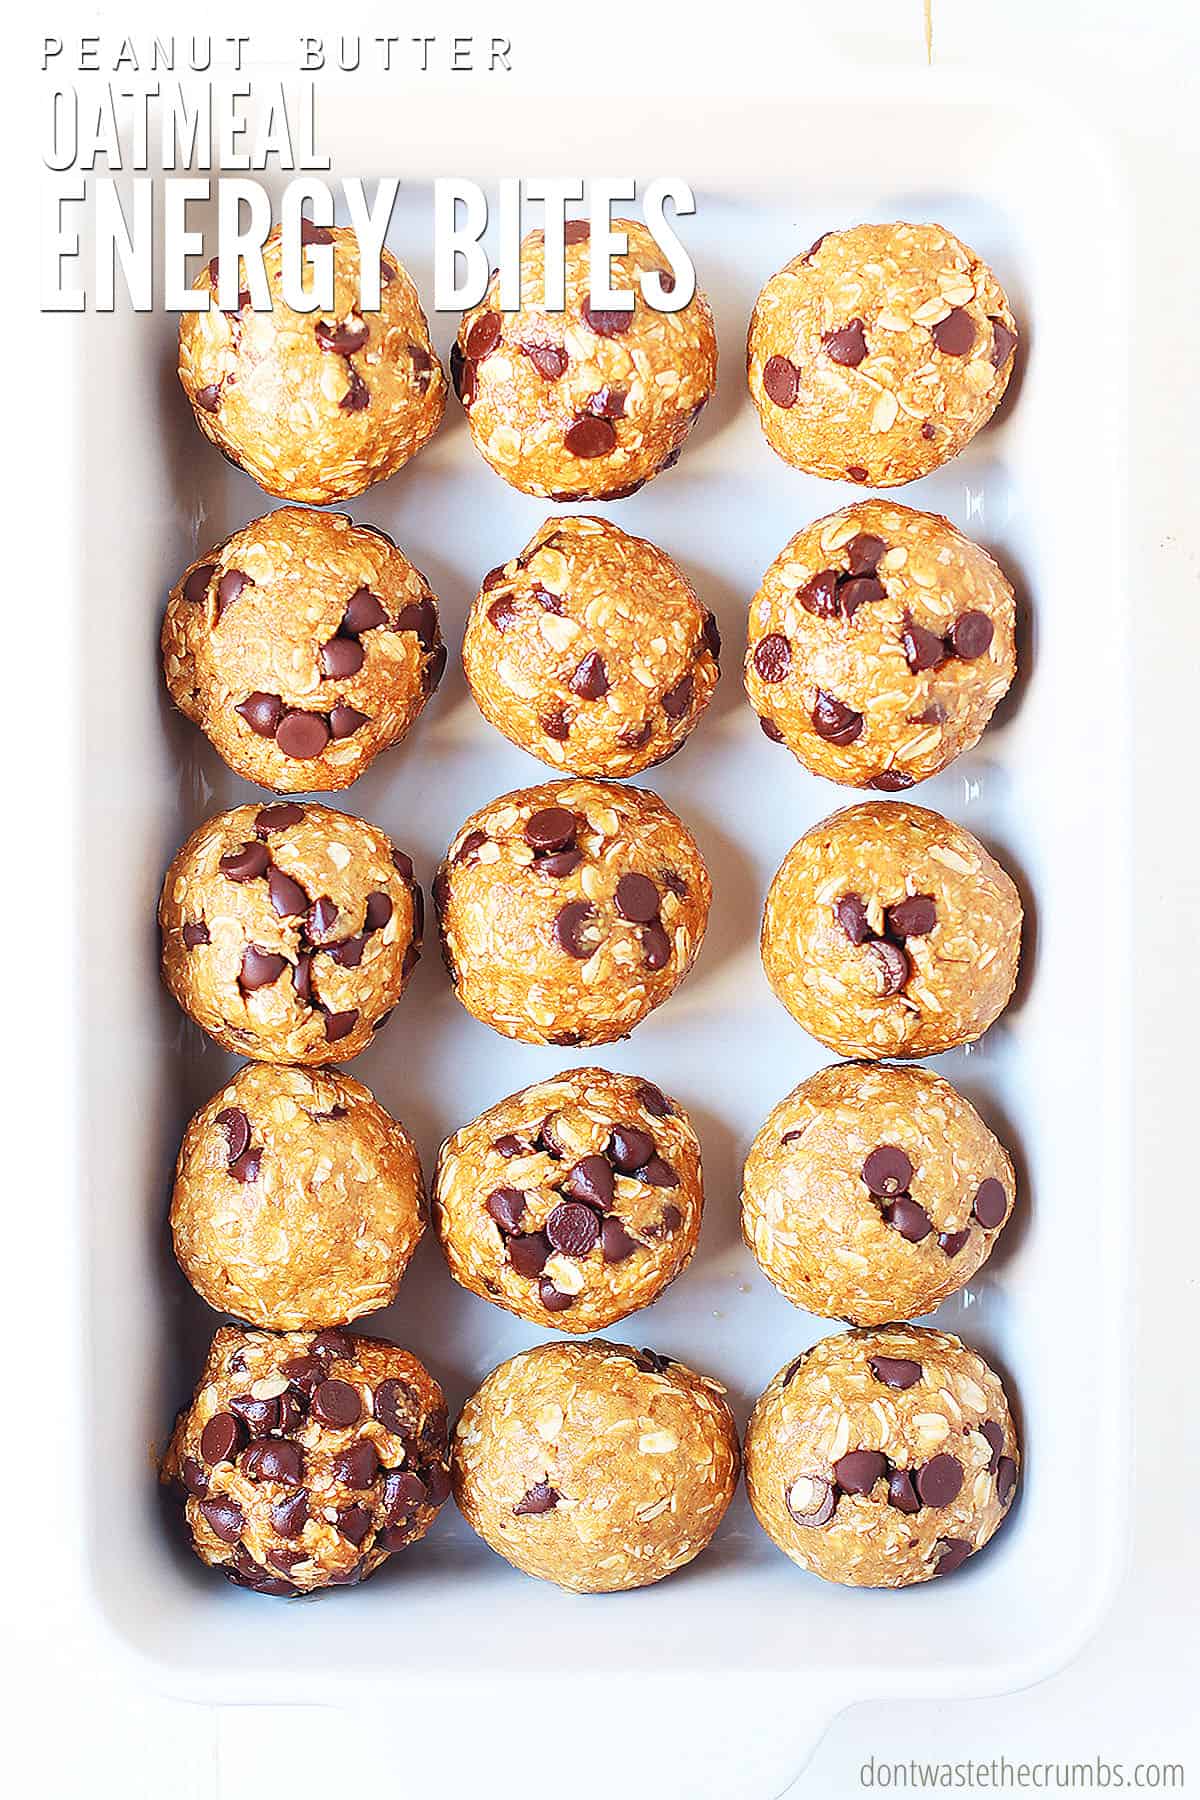 These oatmeal peanut butter energy bites are great for healthy snacking. They are packed with flavor and taste SO good! This recipe doesn't require any baking and only takes a few minutes to make. Try my other no bake treats like sweet and salty energy bites and brownie bites.